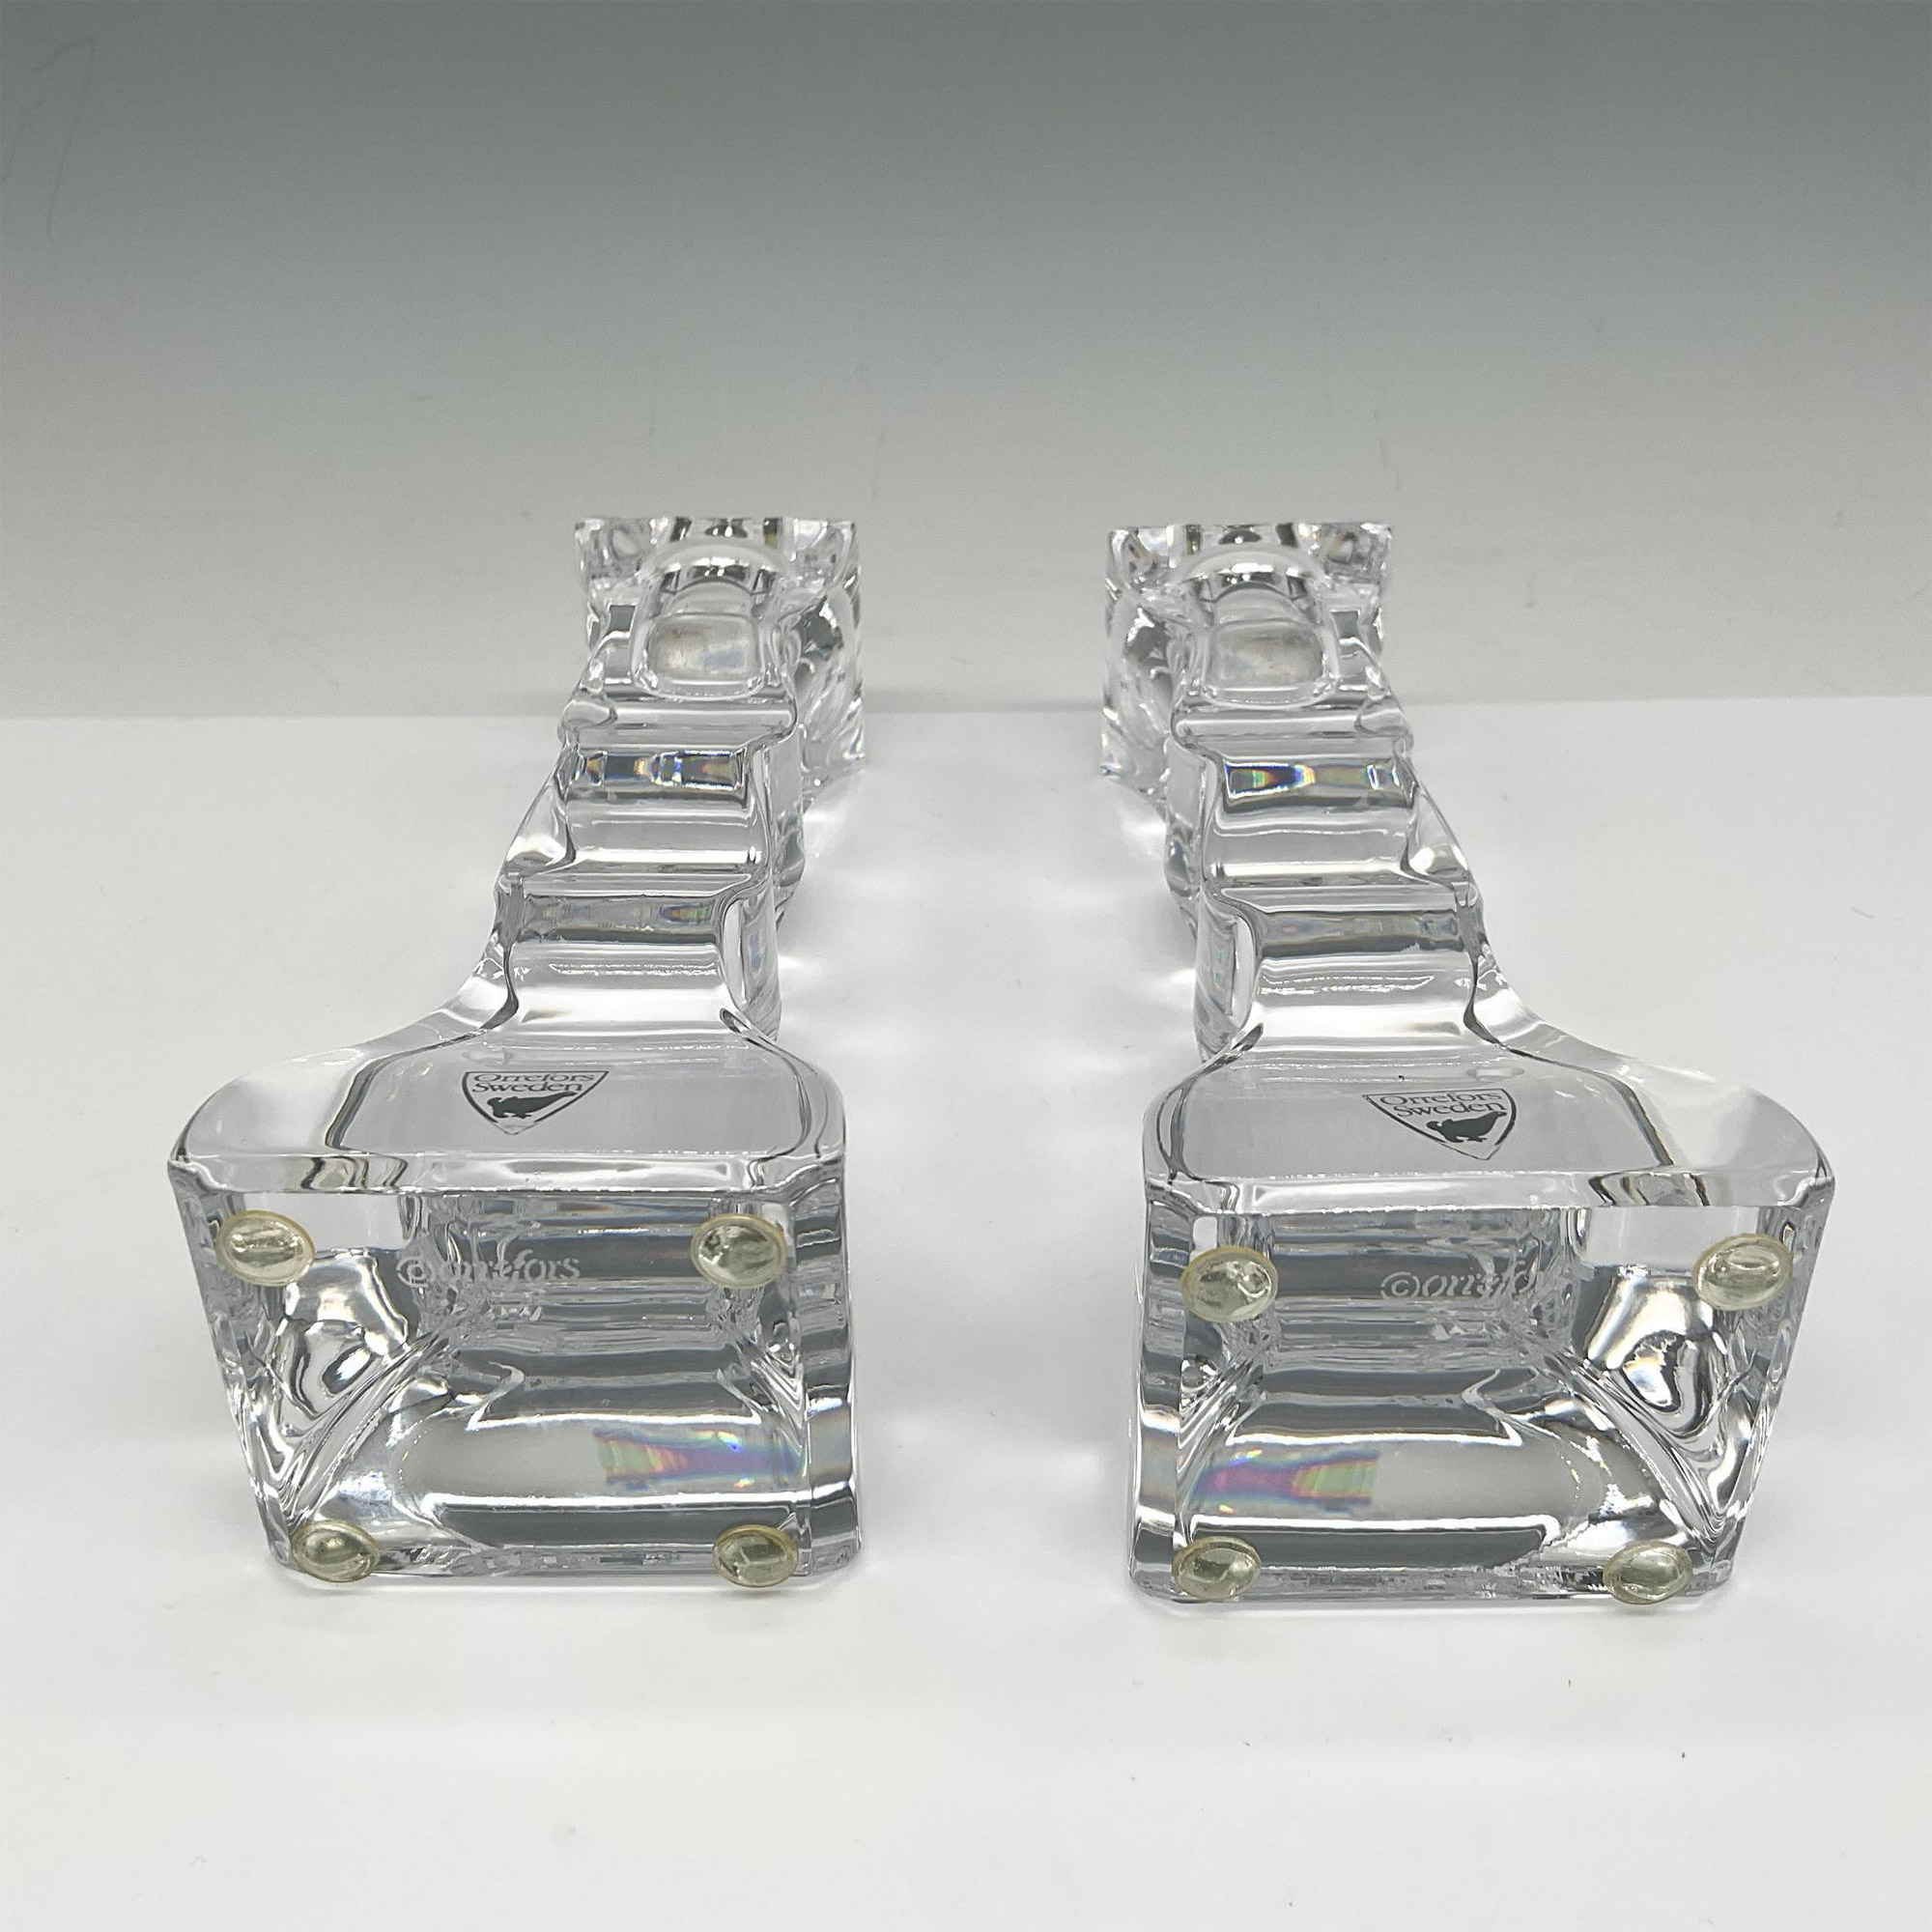 Pair of Orrefors Crystal Candle Stick Holders - Image 3 of 3